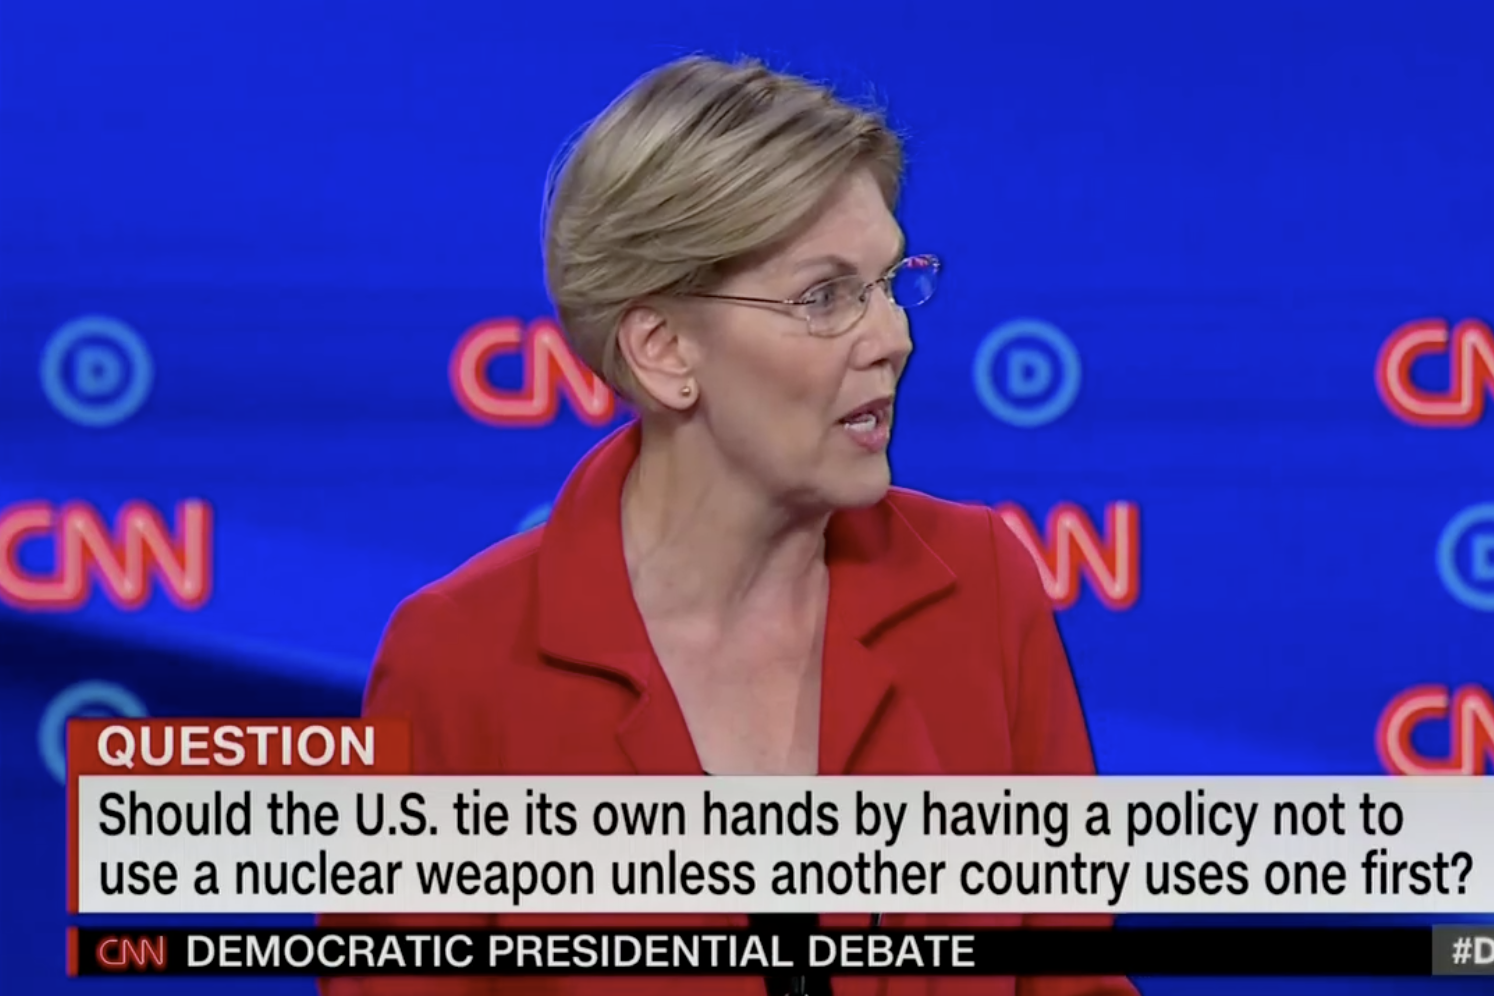 In this screengrab from CNN, Elizabeth Warren debates. The banner reads: "Should the U.S. tie its own hands by having a policy not to use a nuclear weapon unless another country uses one first?"